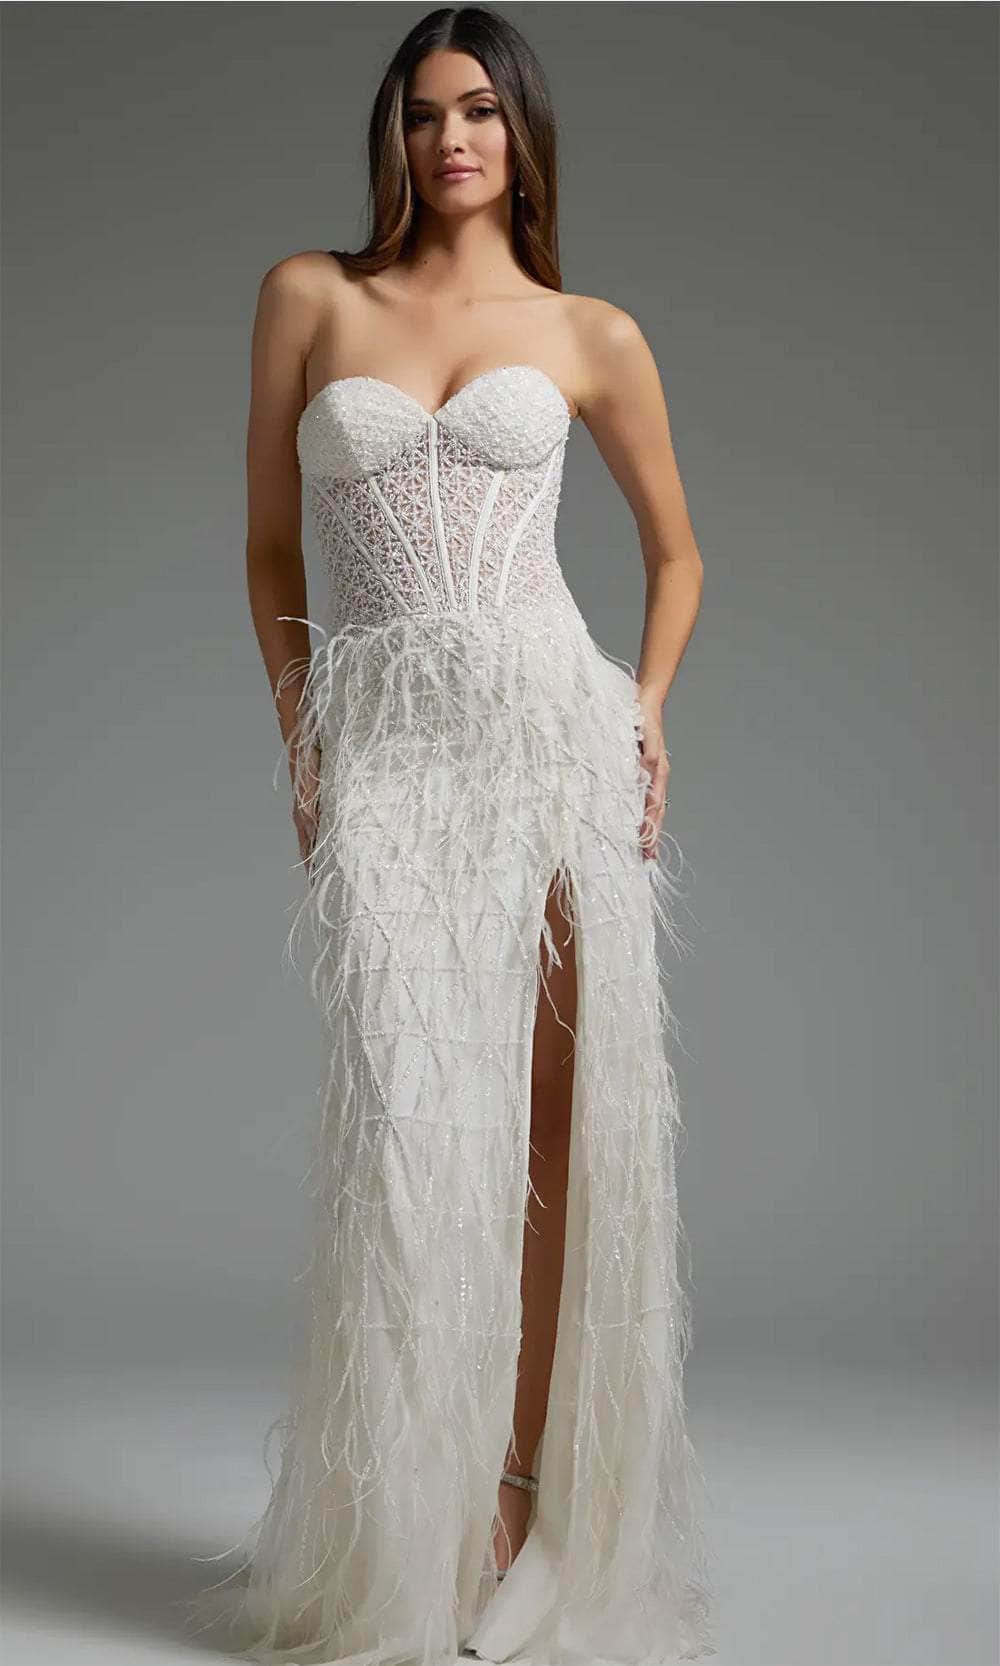 Jovani 36362 - Feathered Sheath Bridal Gown Bridal Dresses 00  Off-White